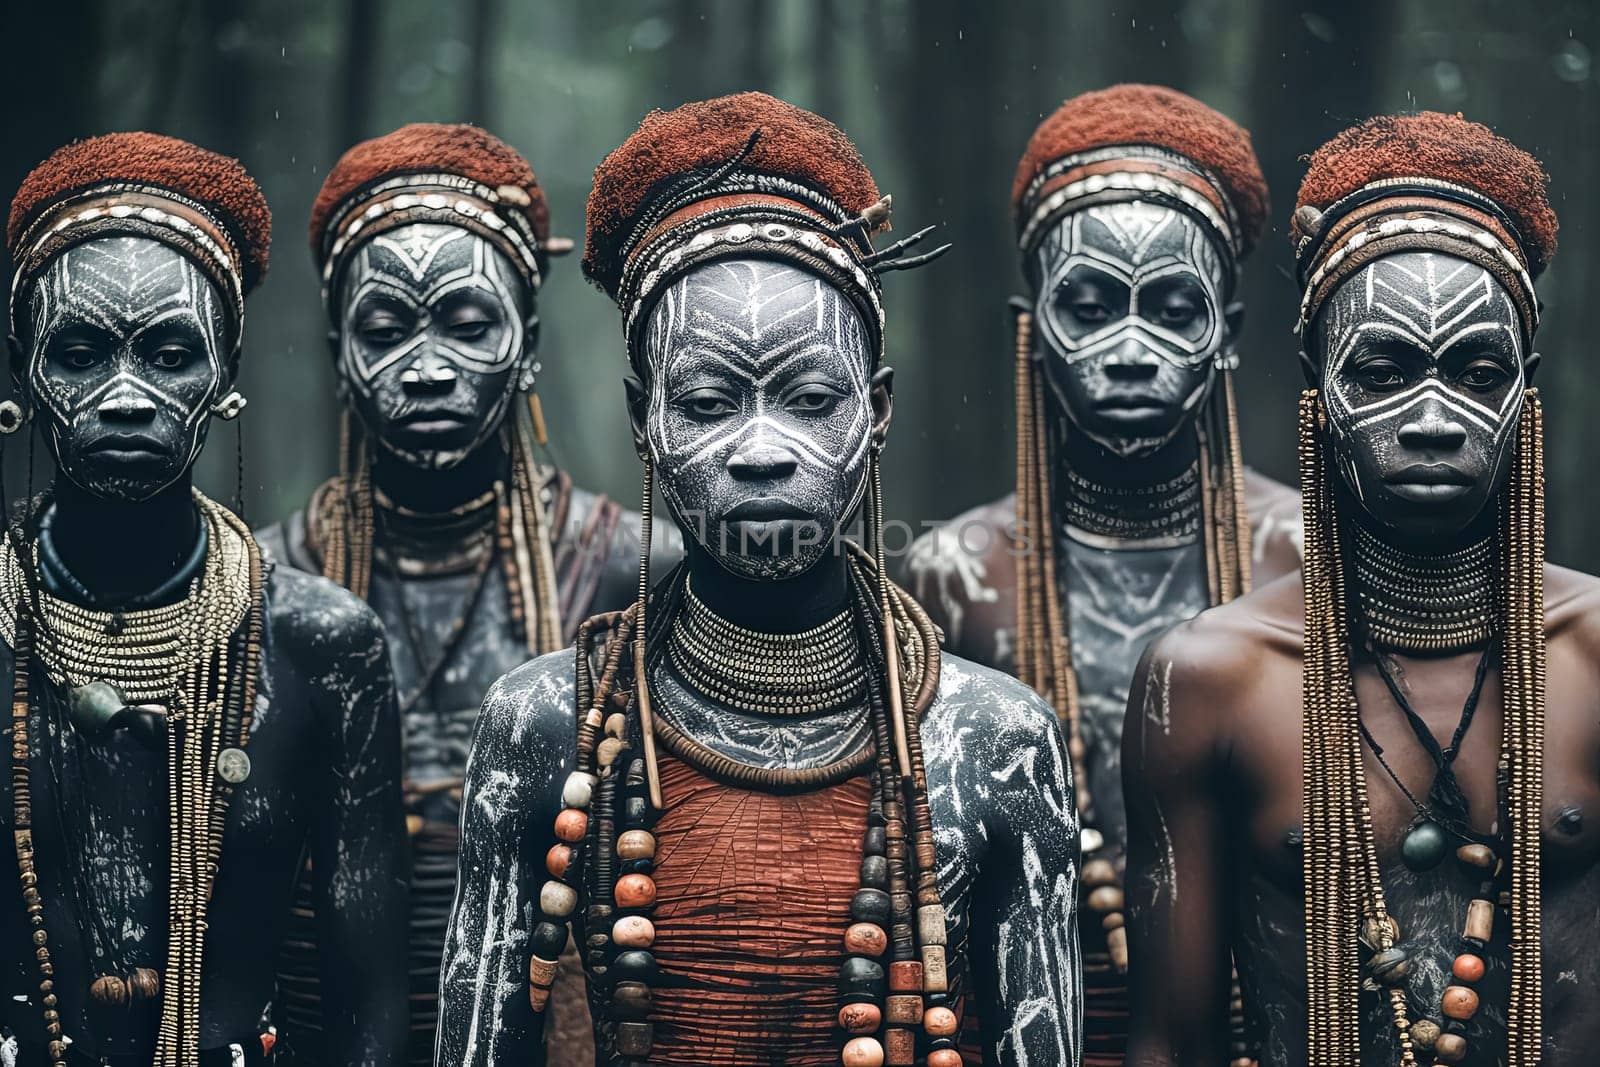 In a remote African village, women with intricately painted faces showcase the rich cultural heritage of their primitive tribe in a captivating image.